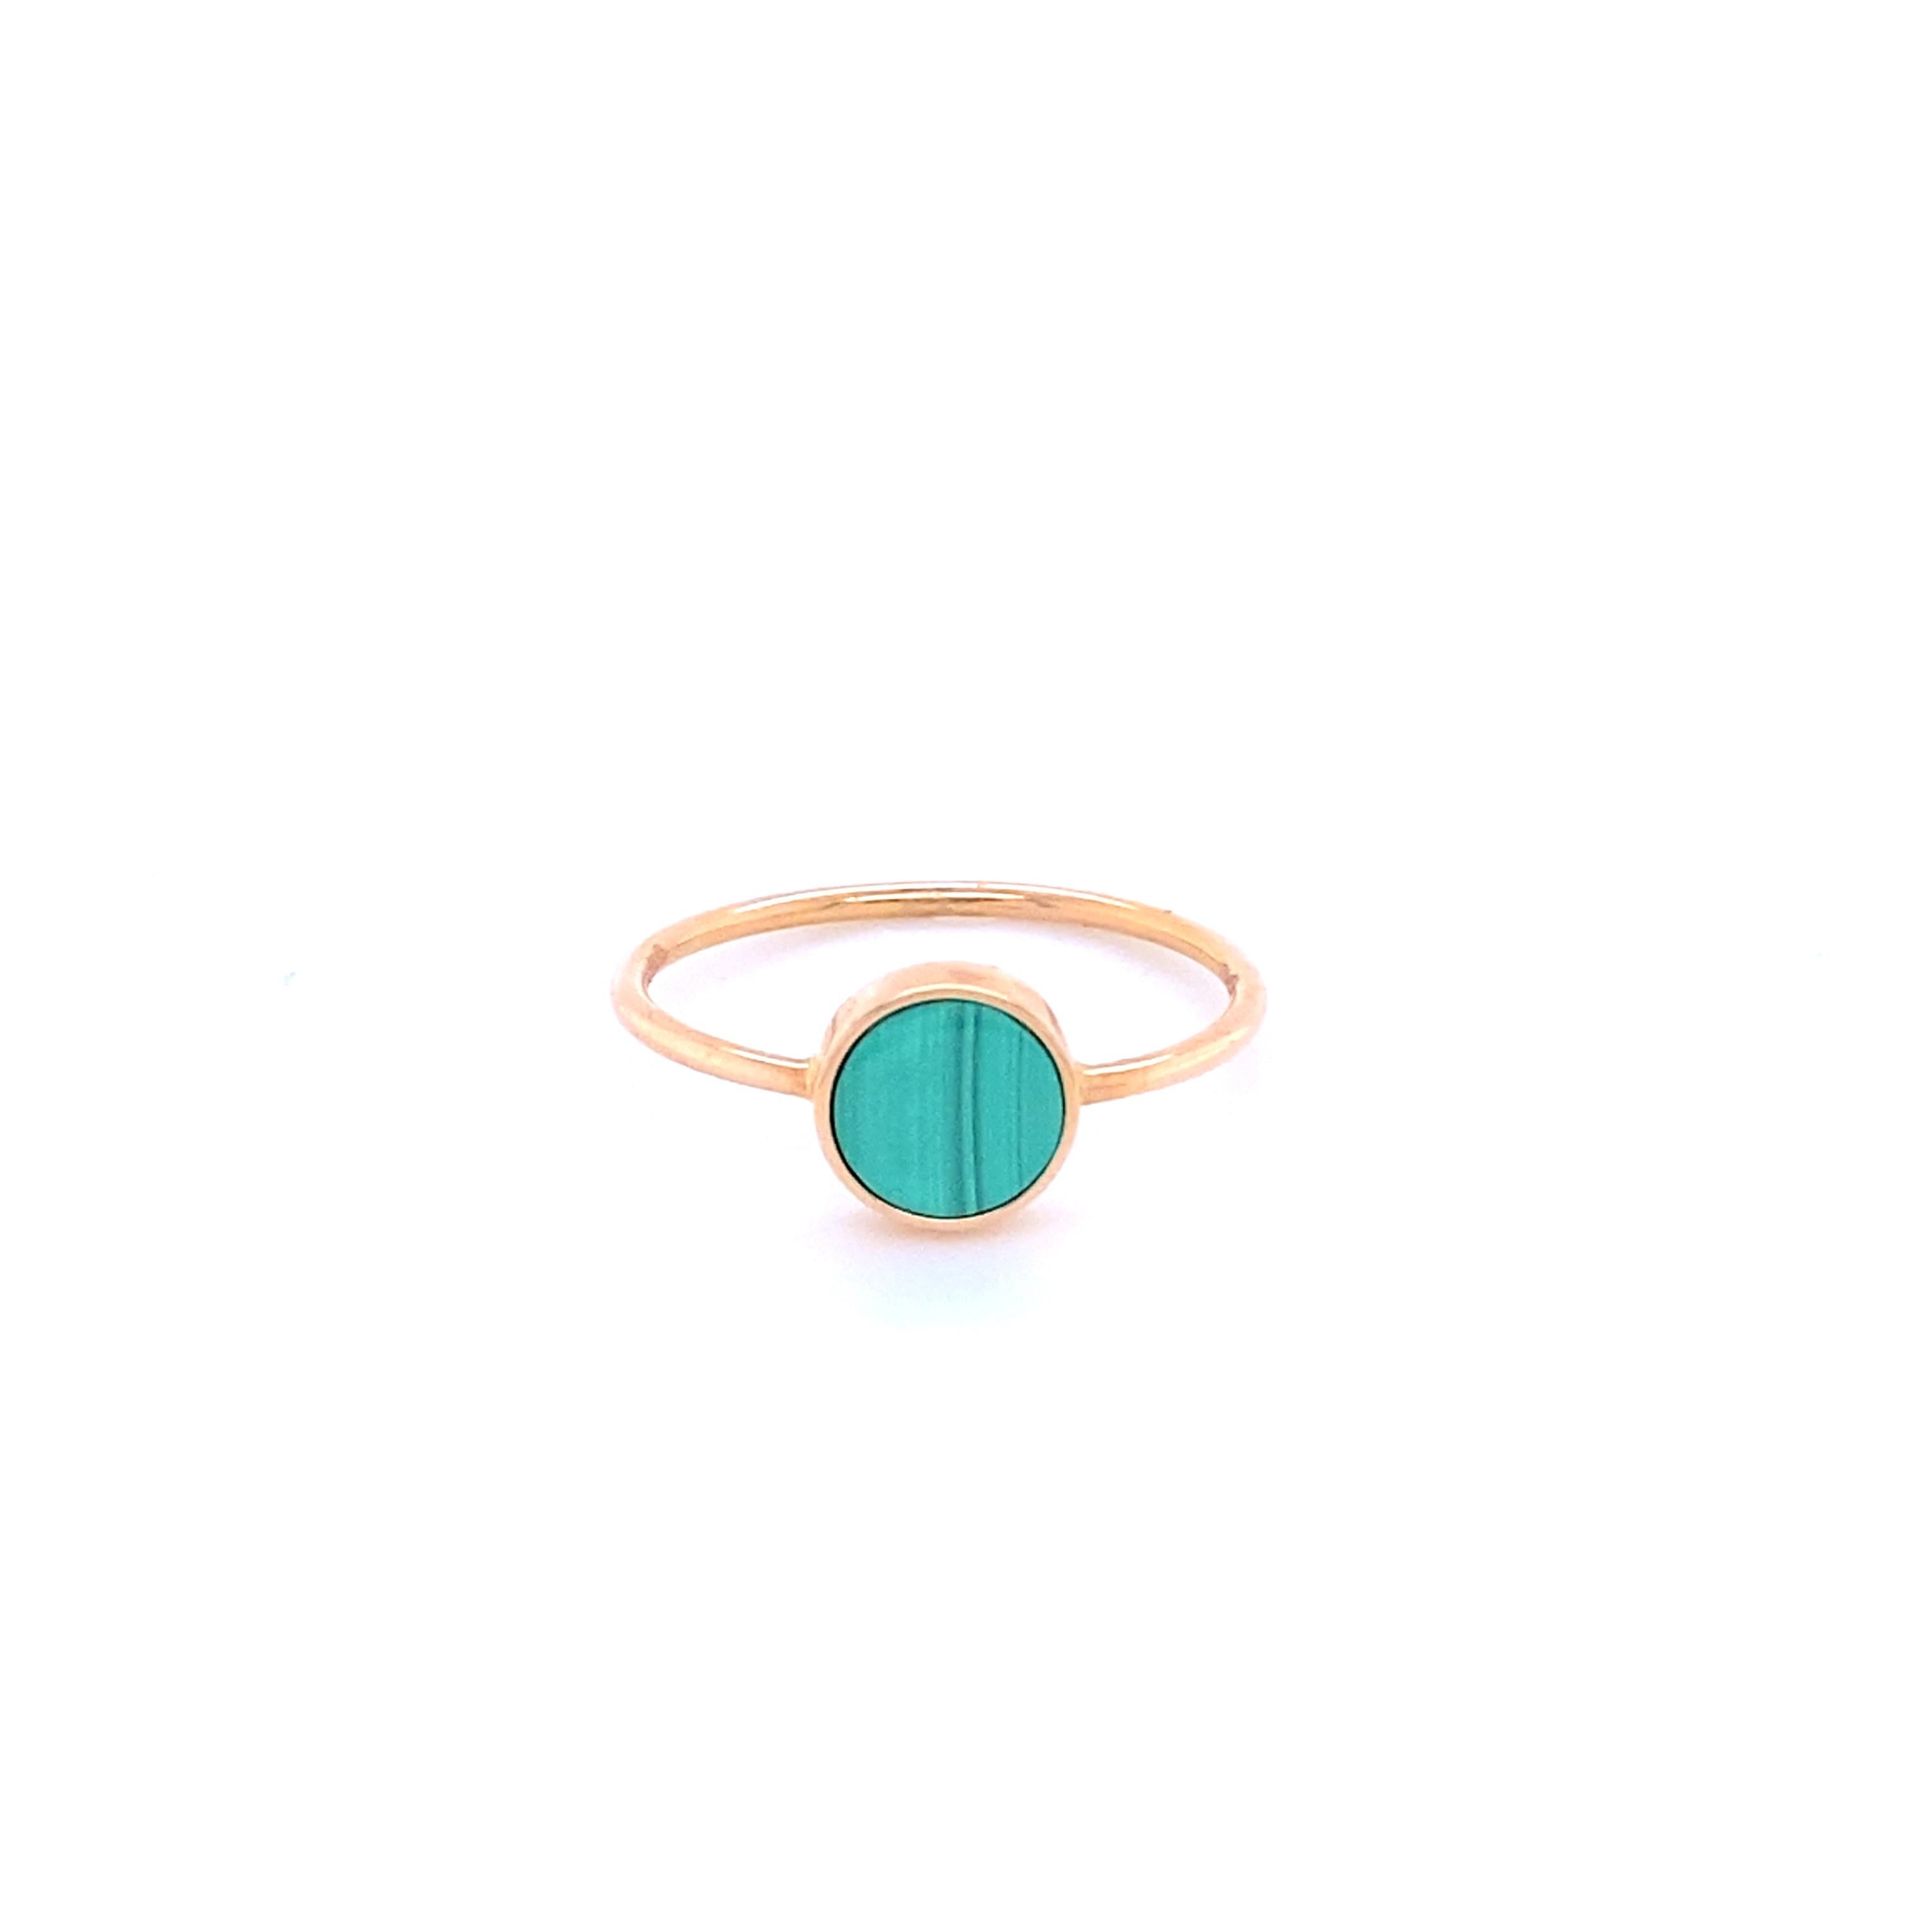 Disc Ring in 18 Carat Pink Gold and Malachite

The pattern size is 6mm. It is a variation of natural stones and original and graphic shapes. We play with colors, we combine them, we wear them in accumulation... for a colorful life!
The benefits of